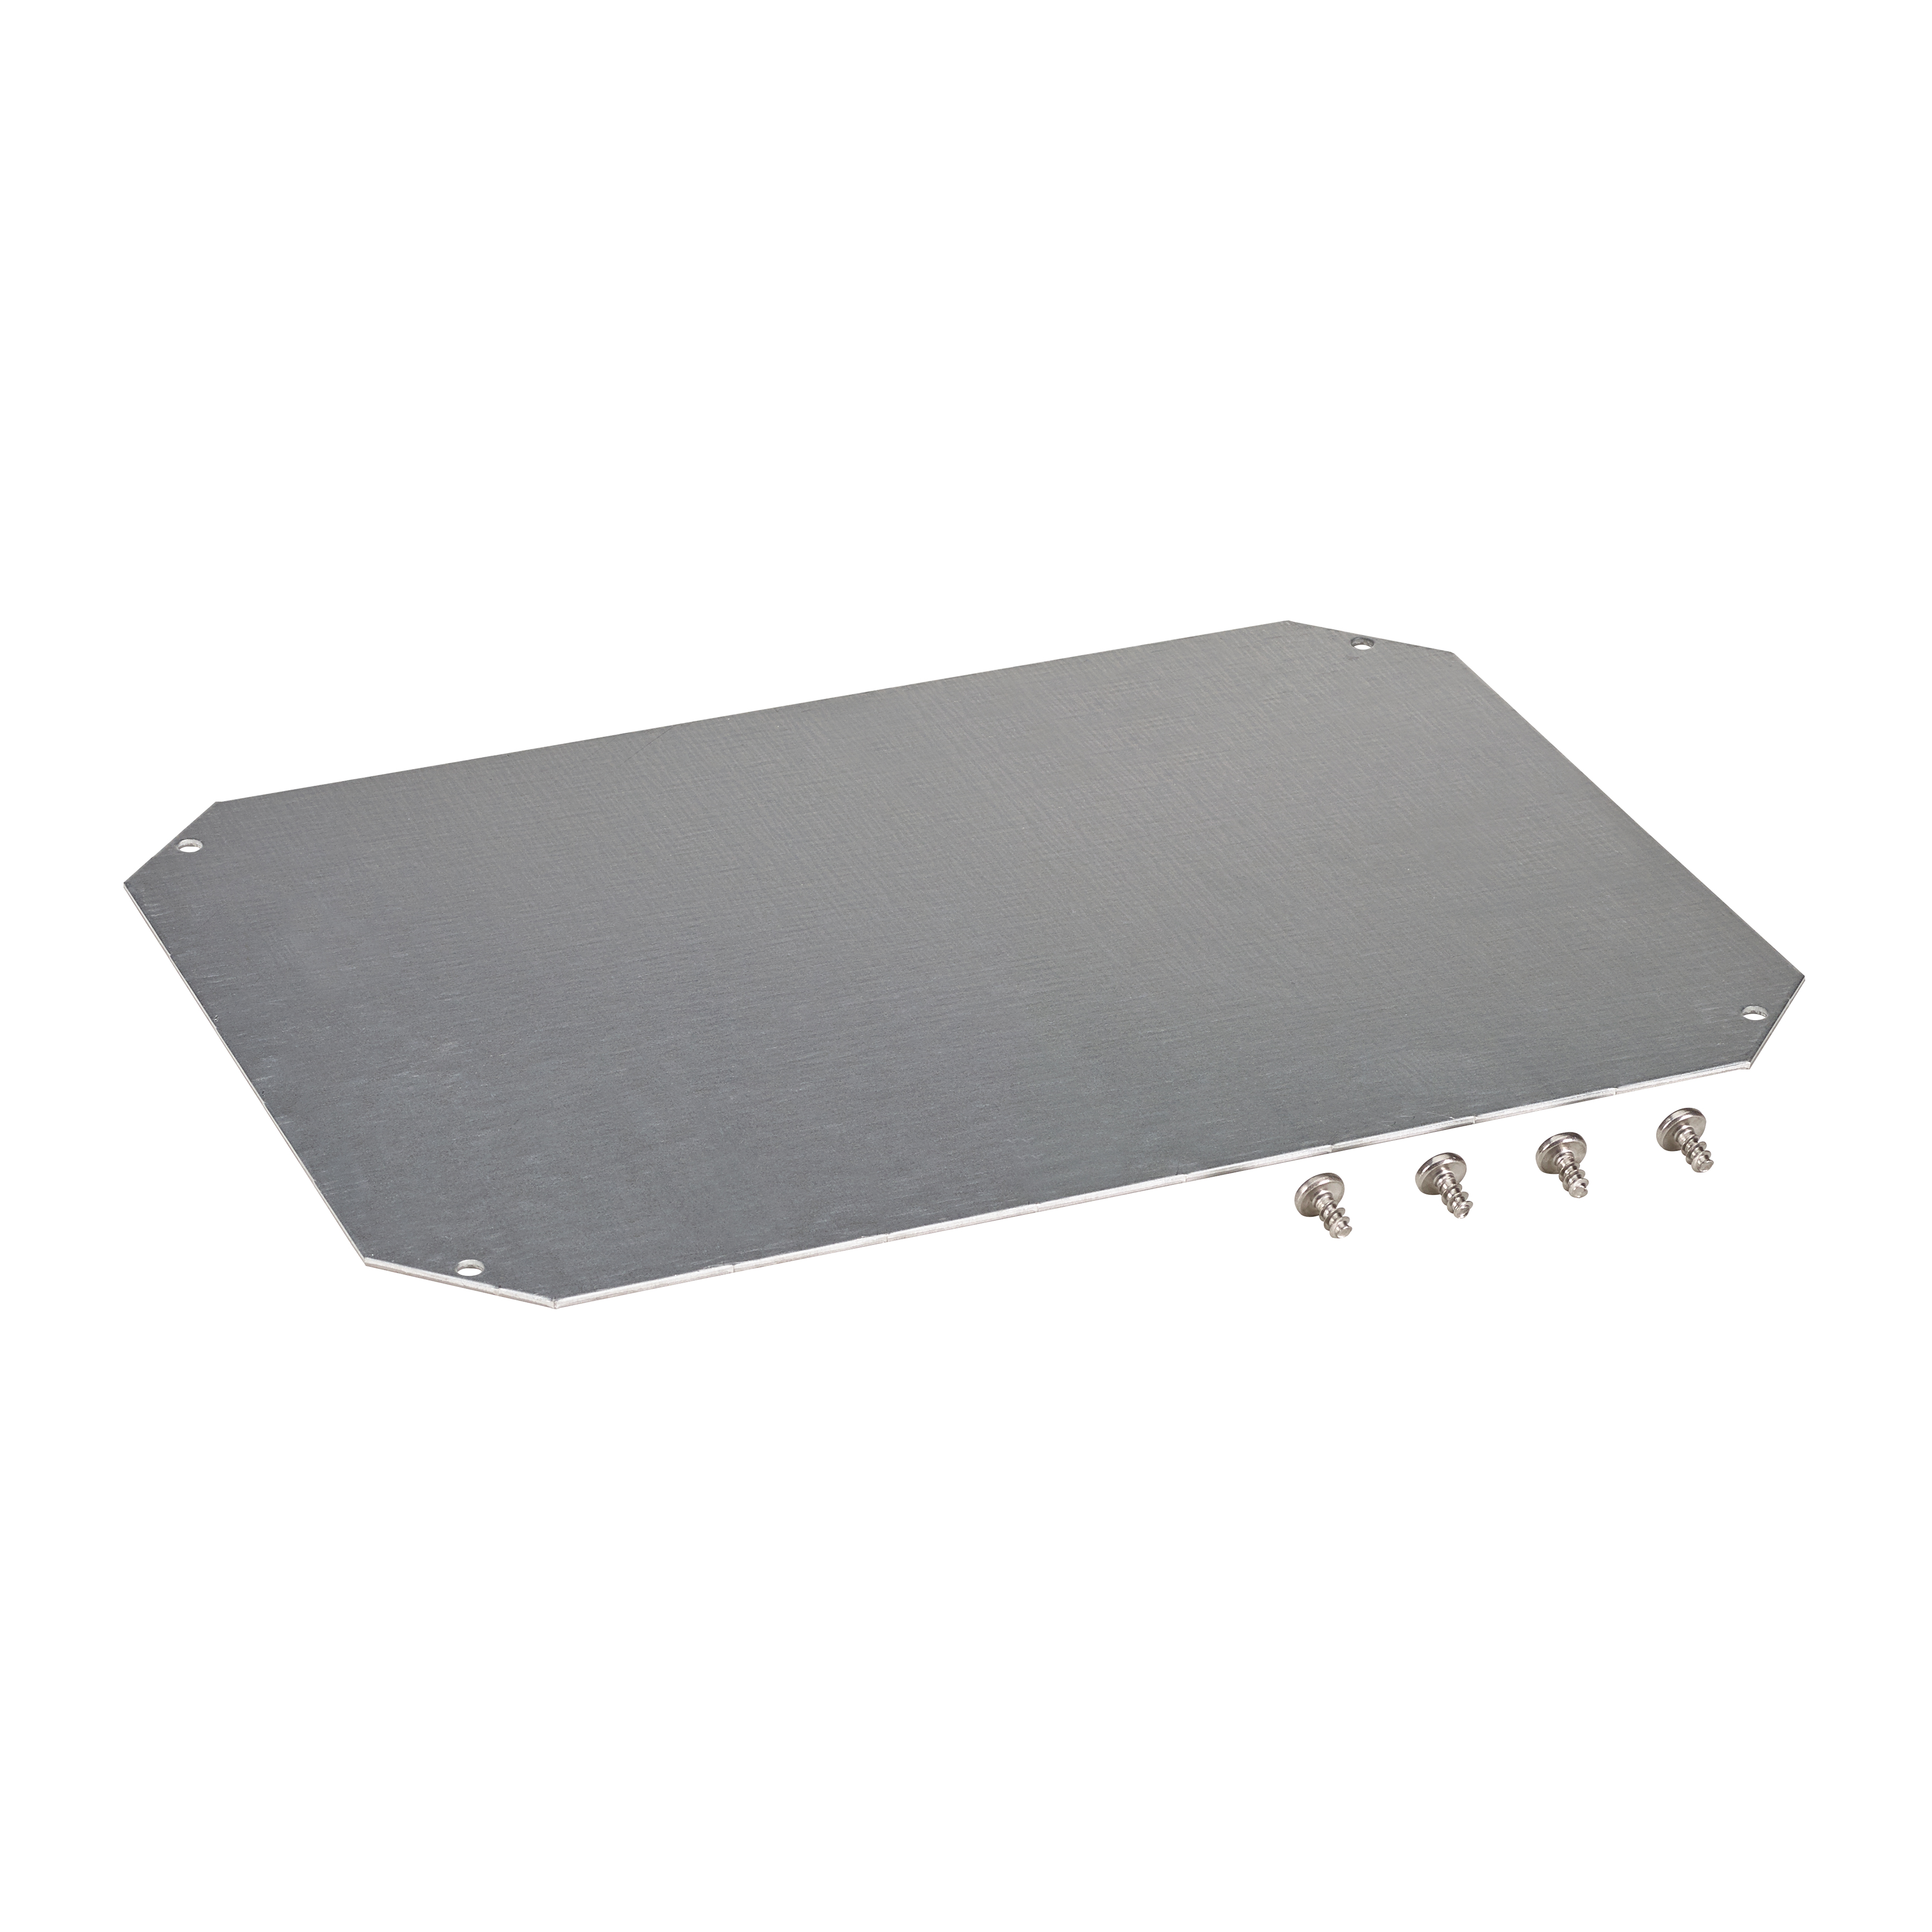 MPS ARCA 3020 Mounting plate